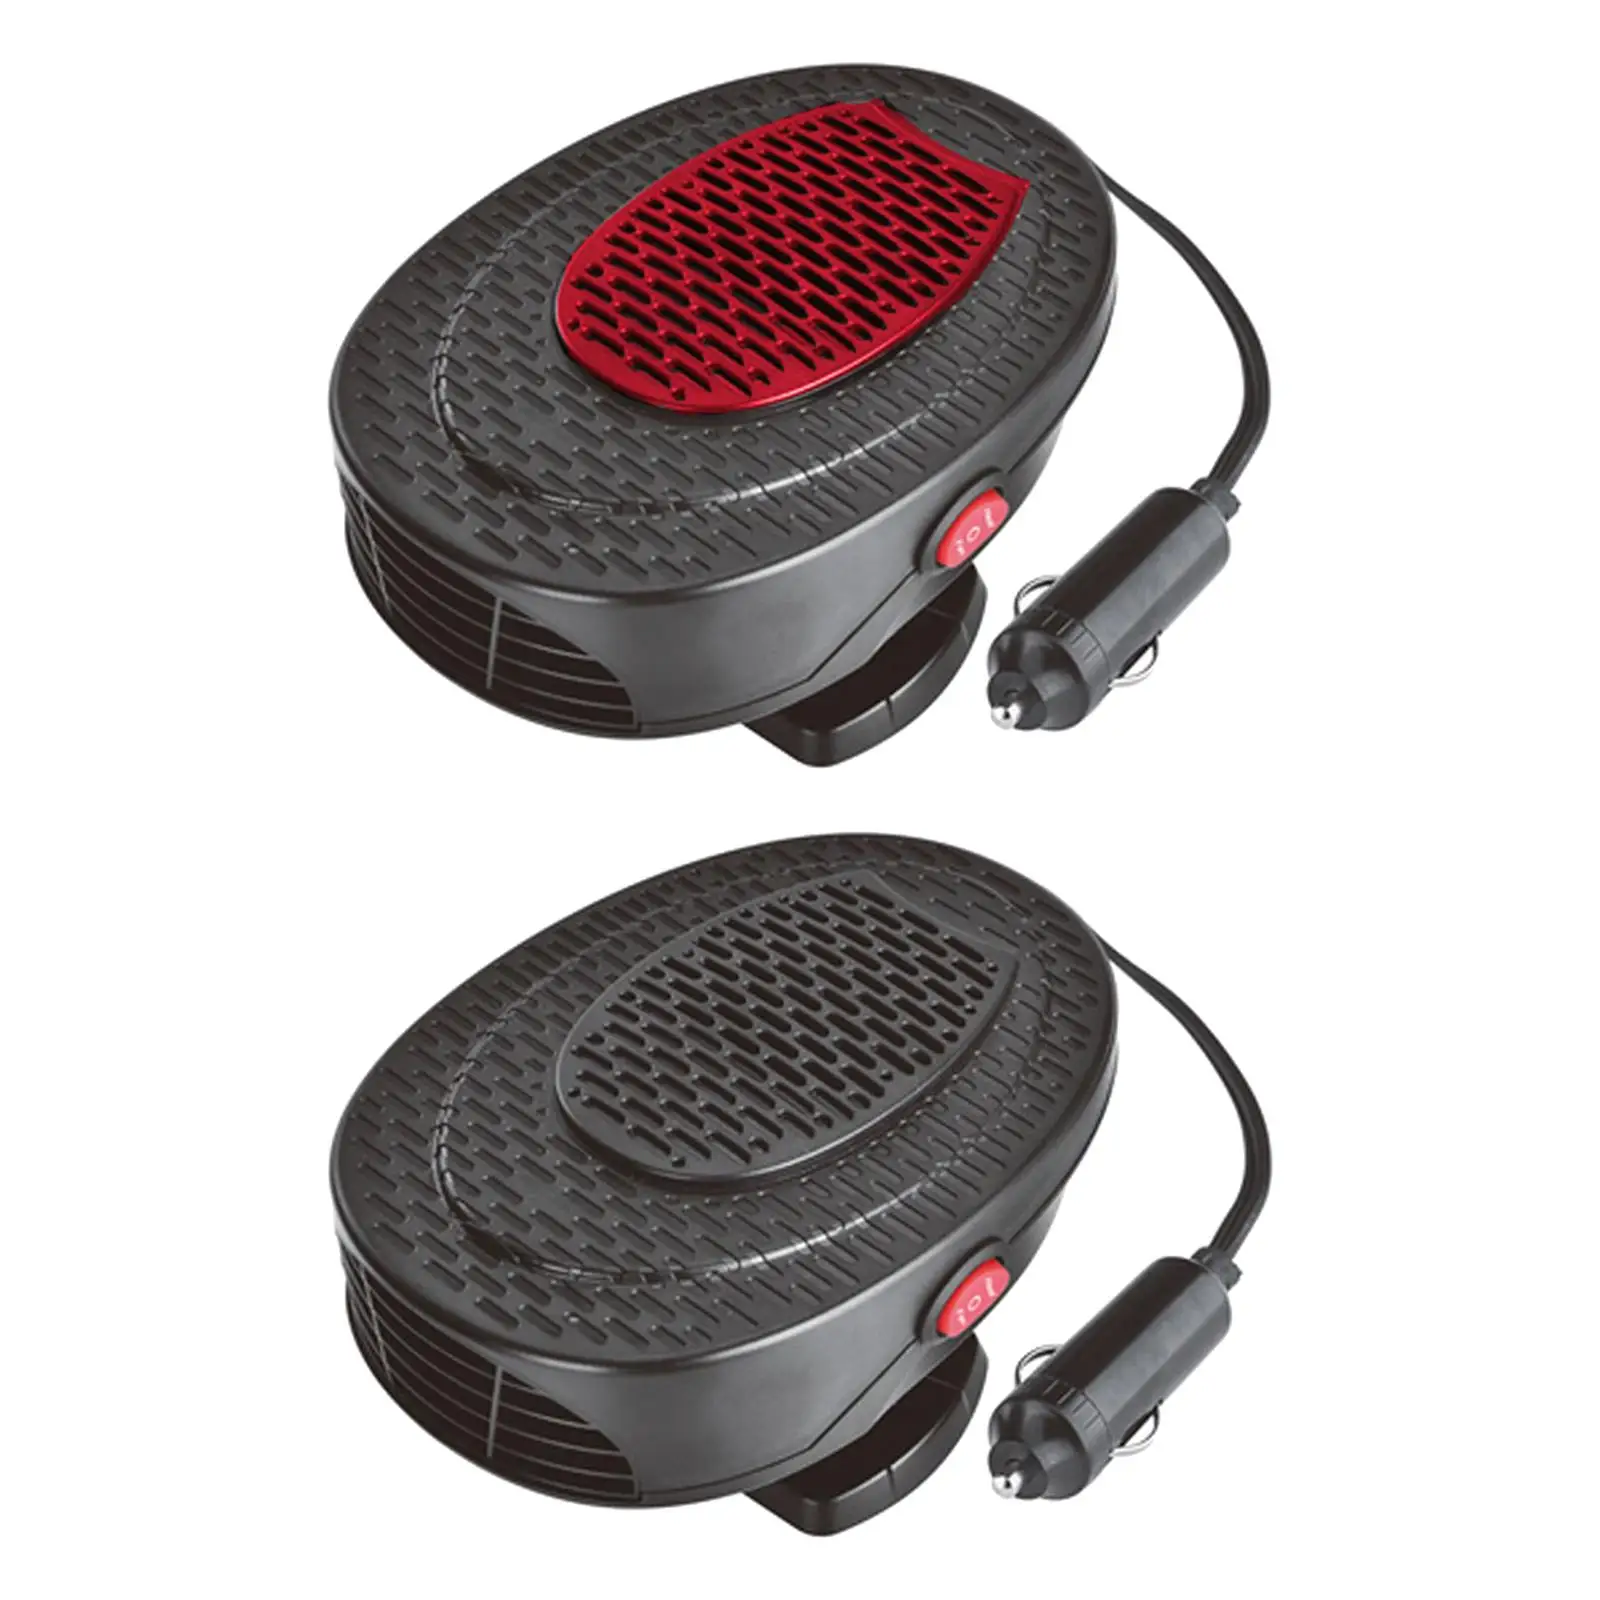 Portable 12V Car Heater 150W 360 Rotatable Demister Defroster Defogger Electric Dryer 1.6M Cable Fan Warmer